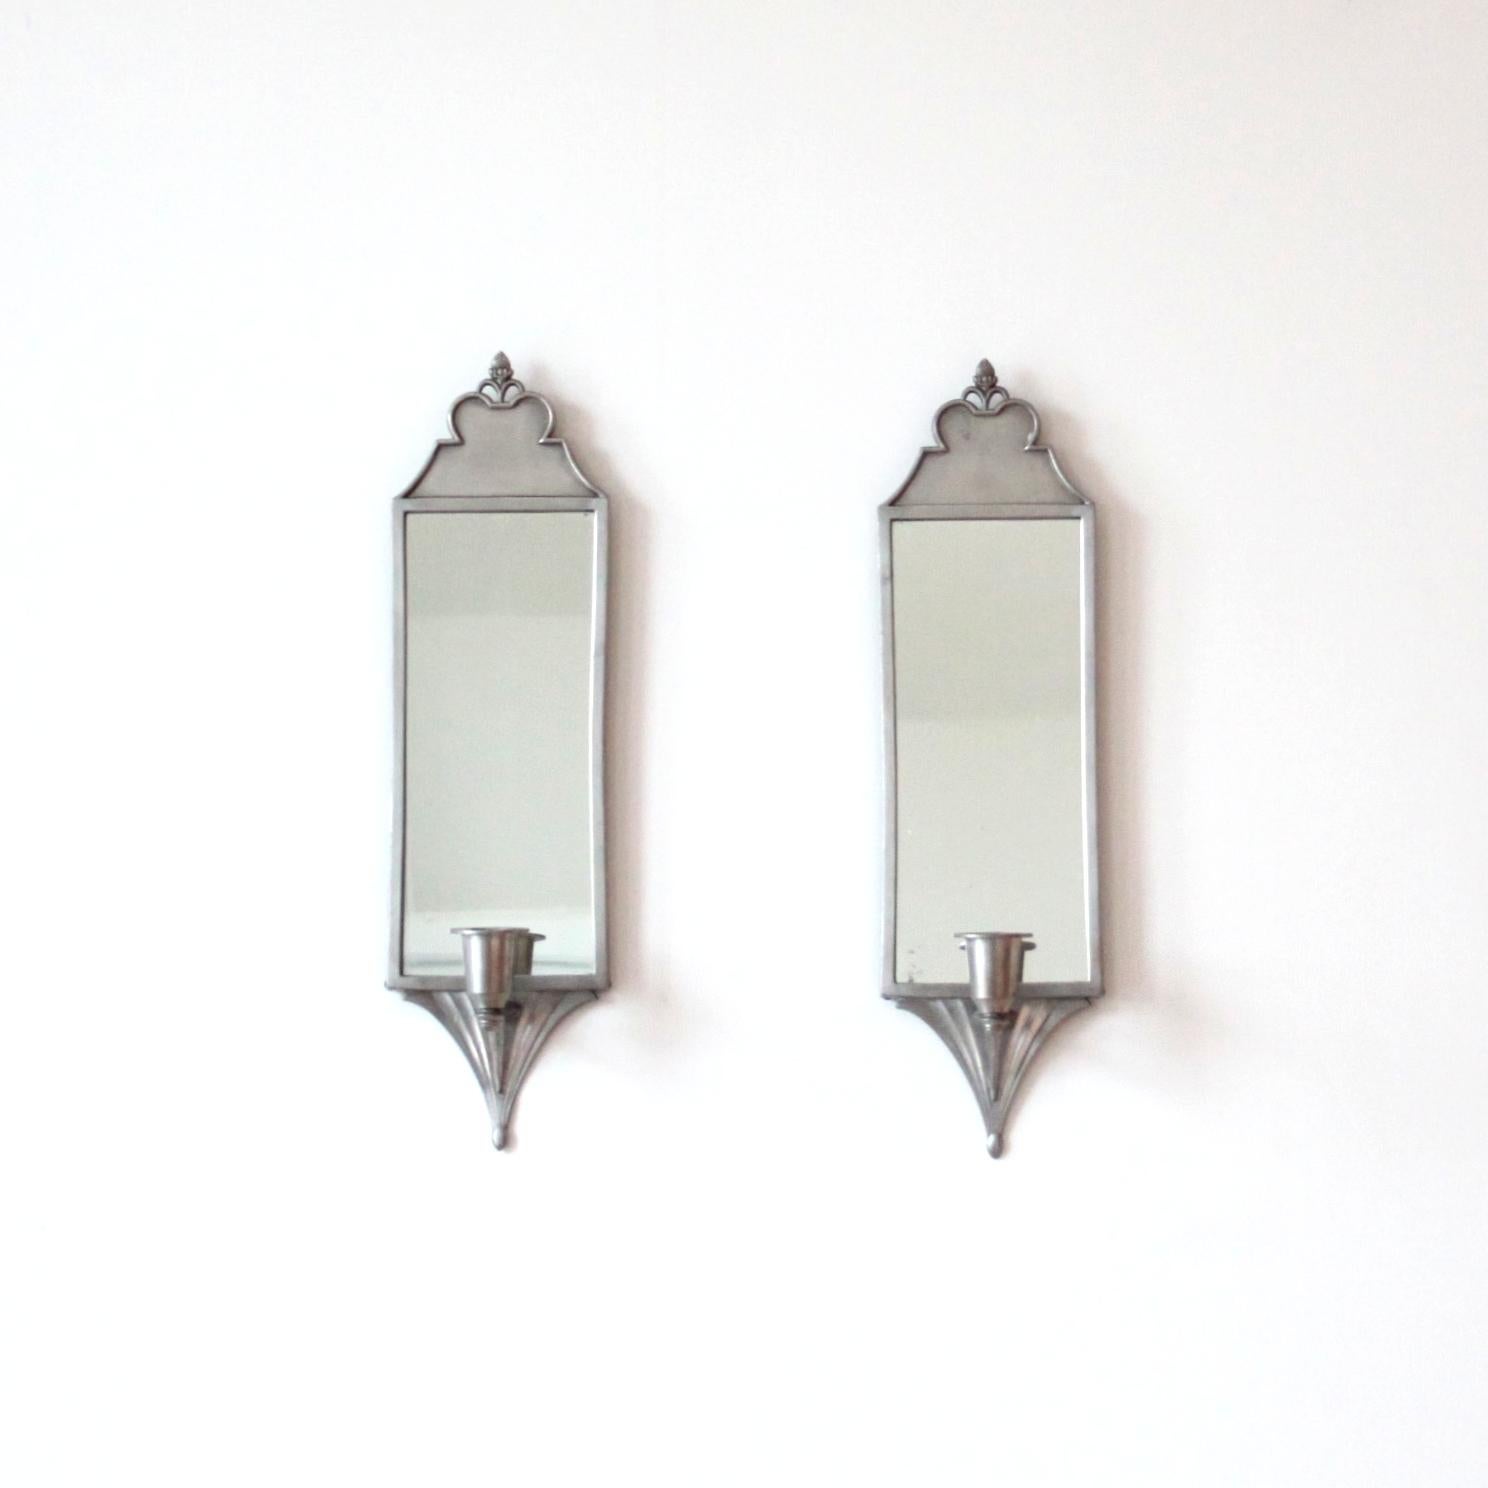 JUST ANDERSEN 

A beautiful pair of candle sconces by Just Andersen in matte pewter. 

This is one of his very early works - Dessin 120 - production 1918-1928. 

Each sconce stamped Just Danmark MT 120.

Very good vintage condition and a beautiful